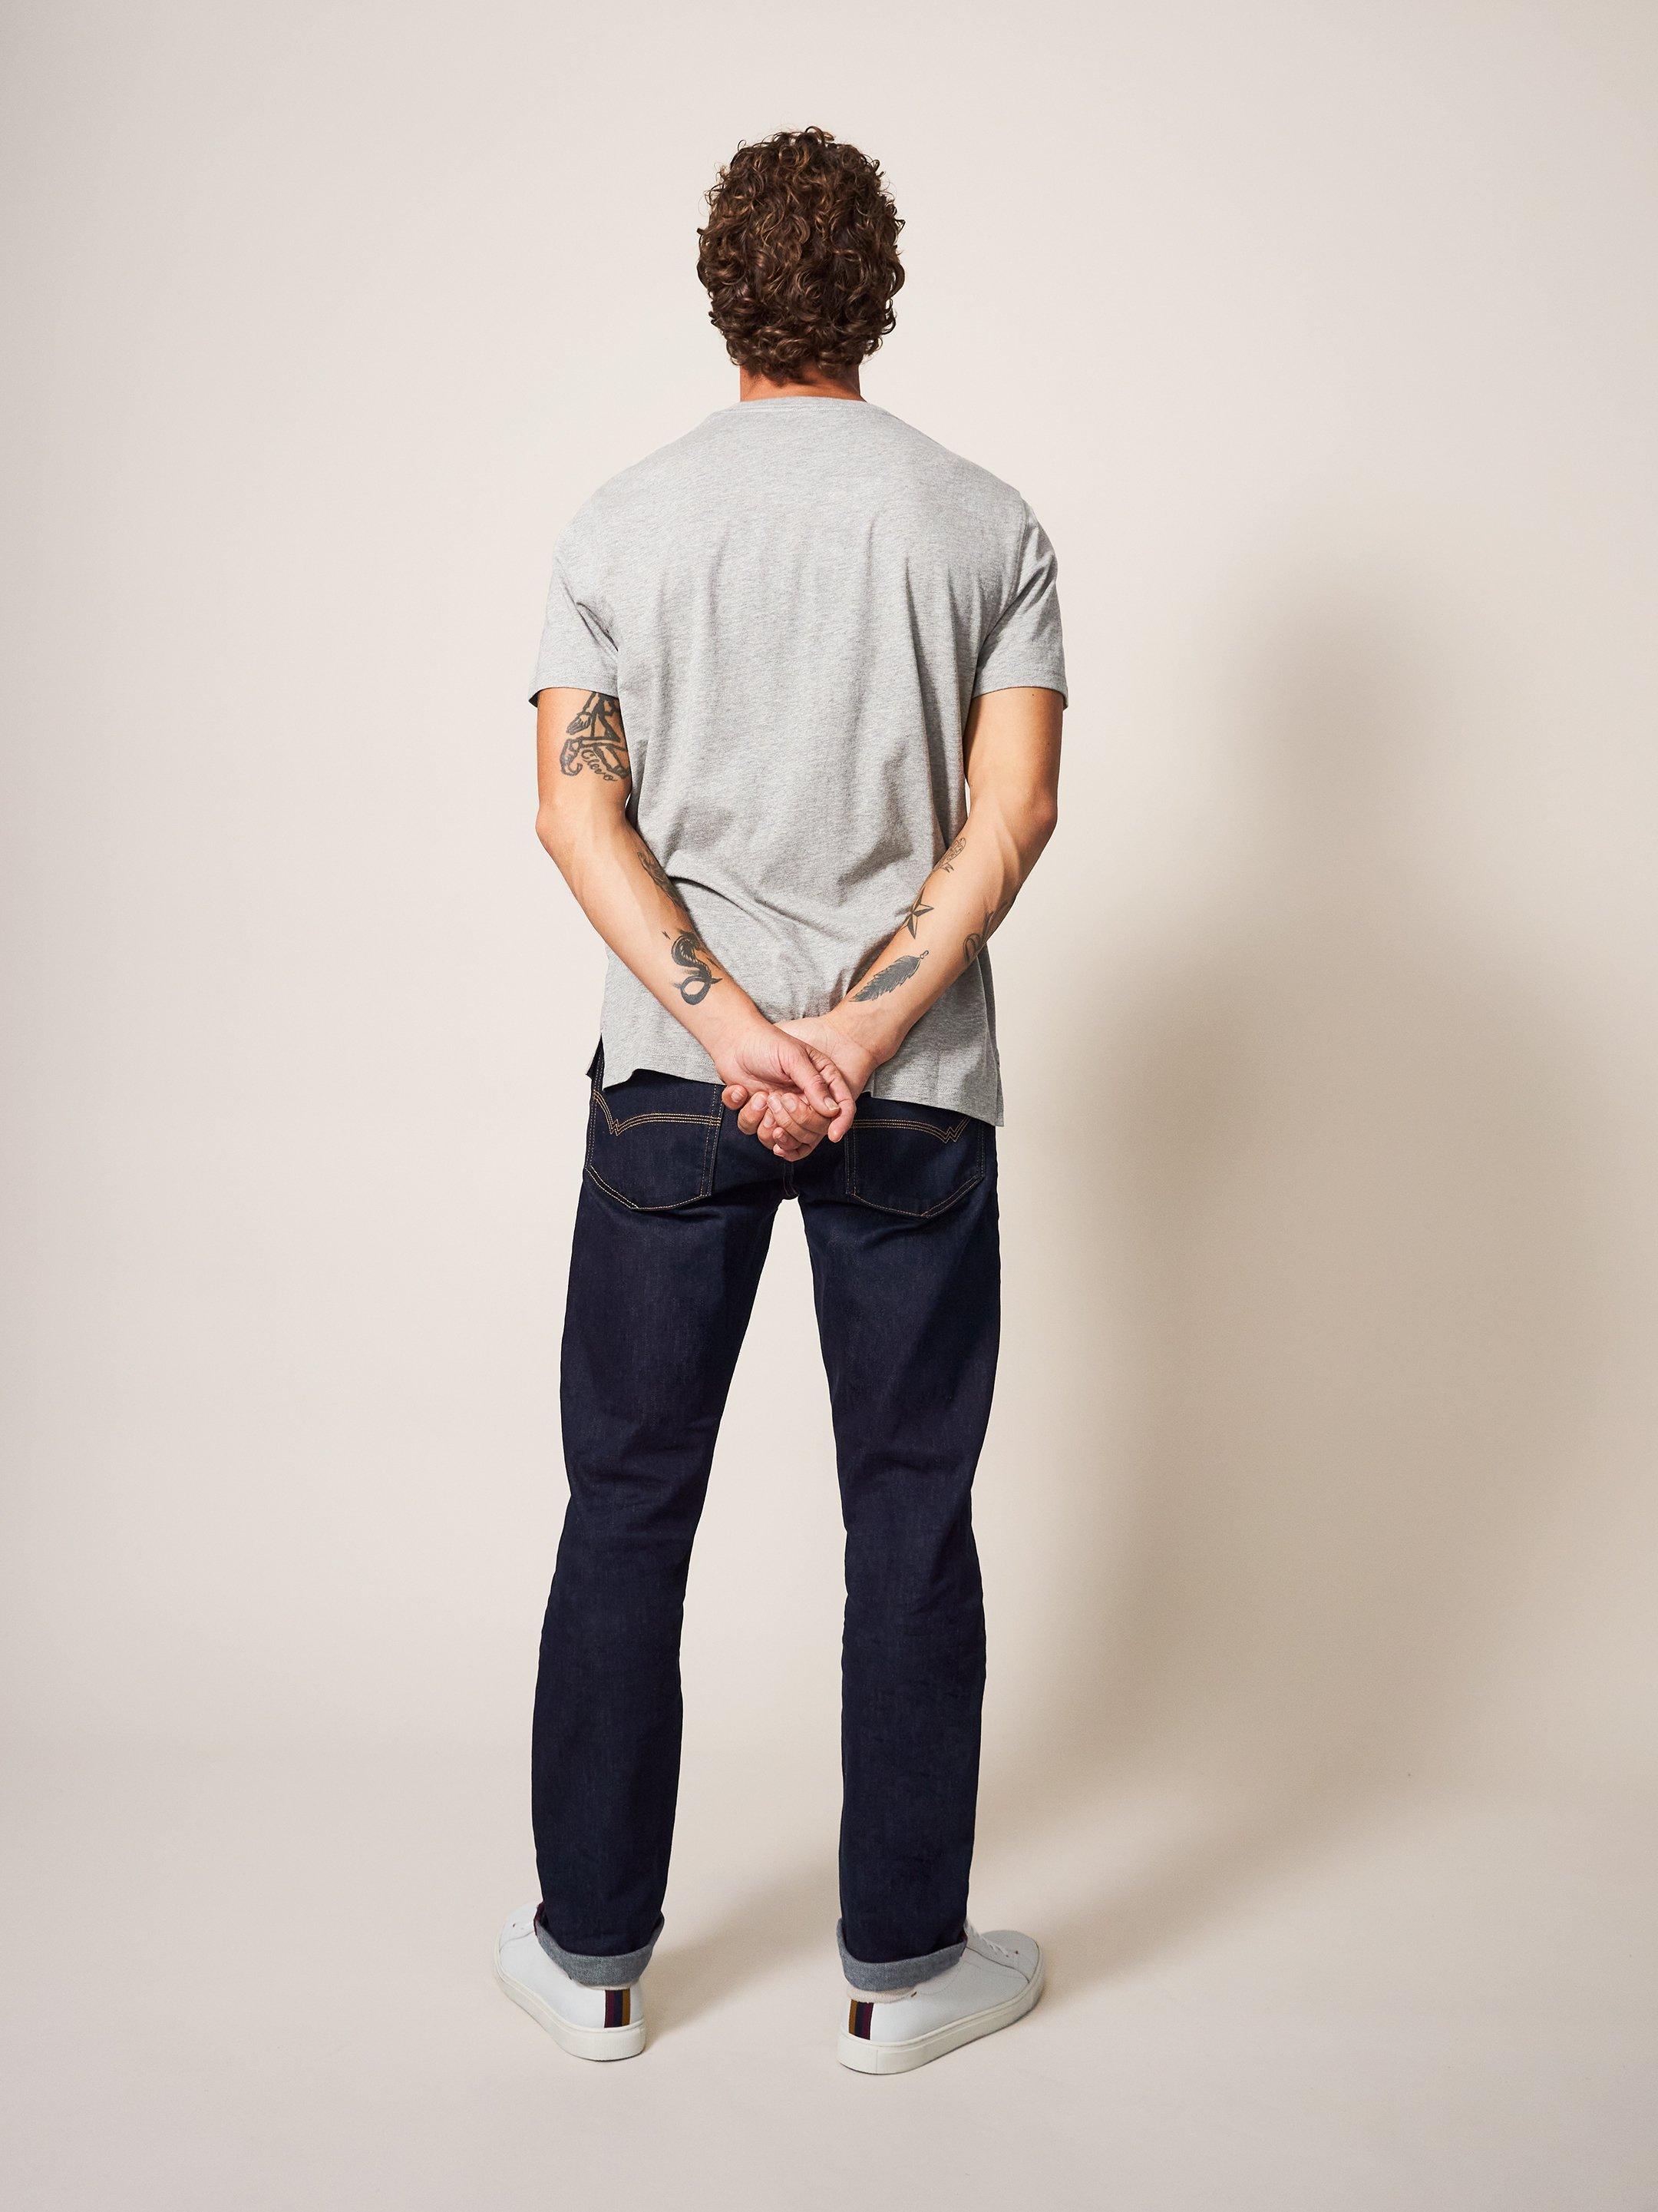 Fixed Gear Graphic Tee in GREY MARL - MODEL BACK